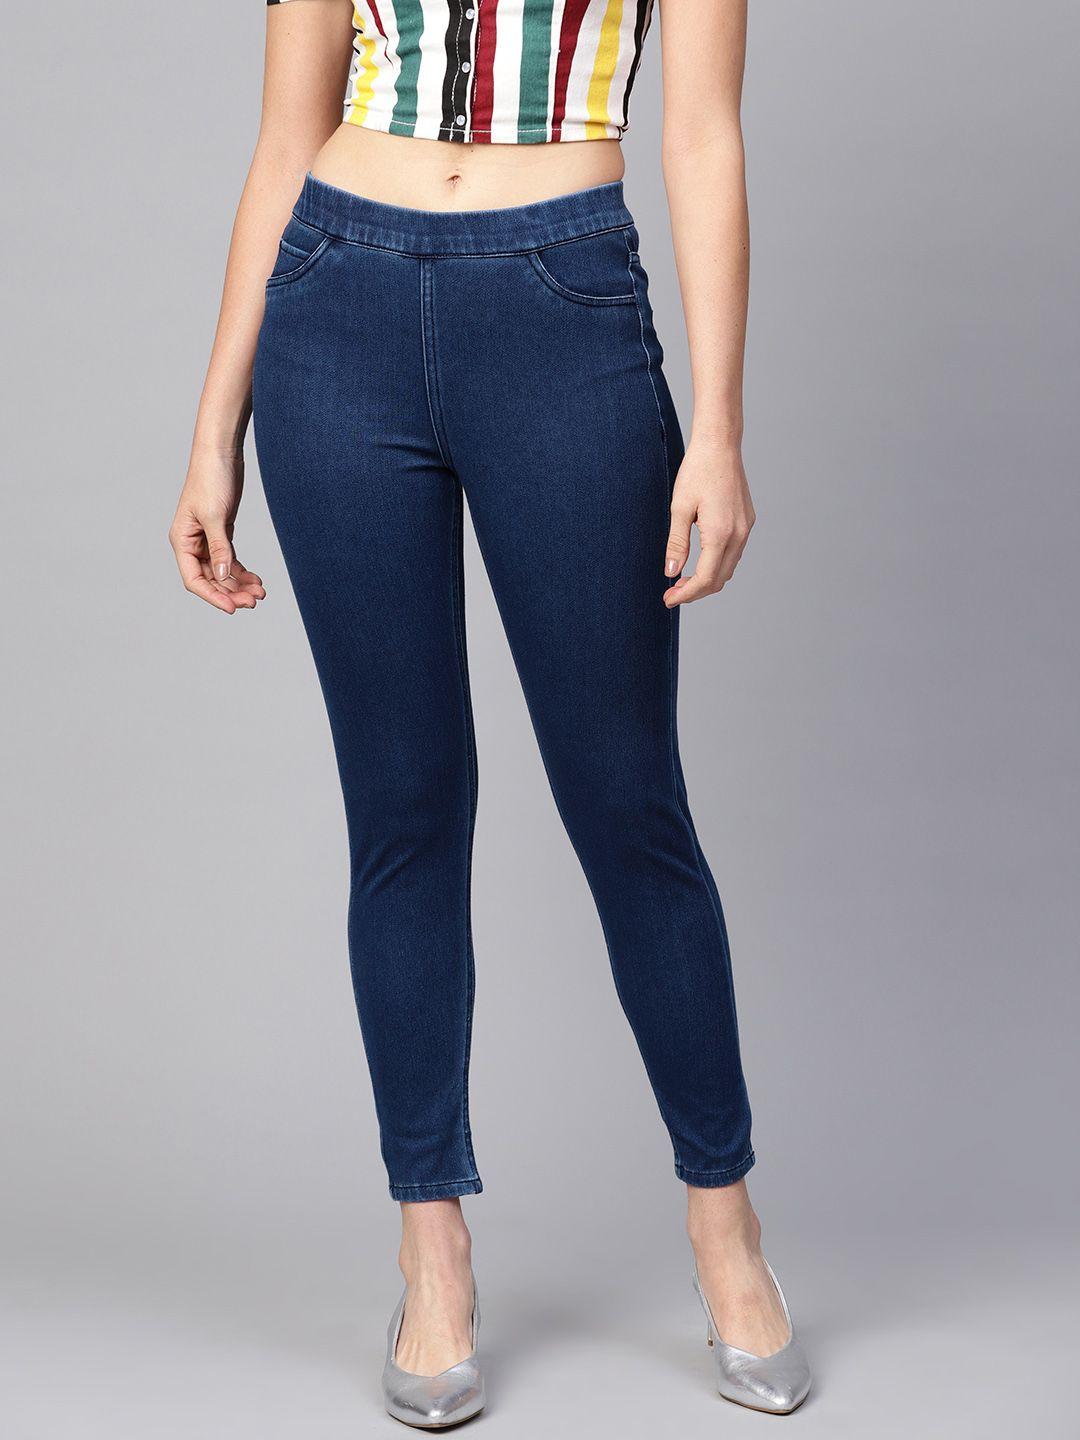 w-women-navy-blue-solid-cropped-jeggings